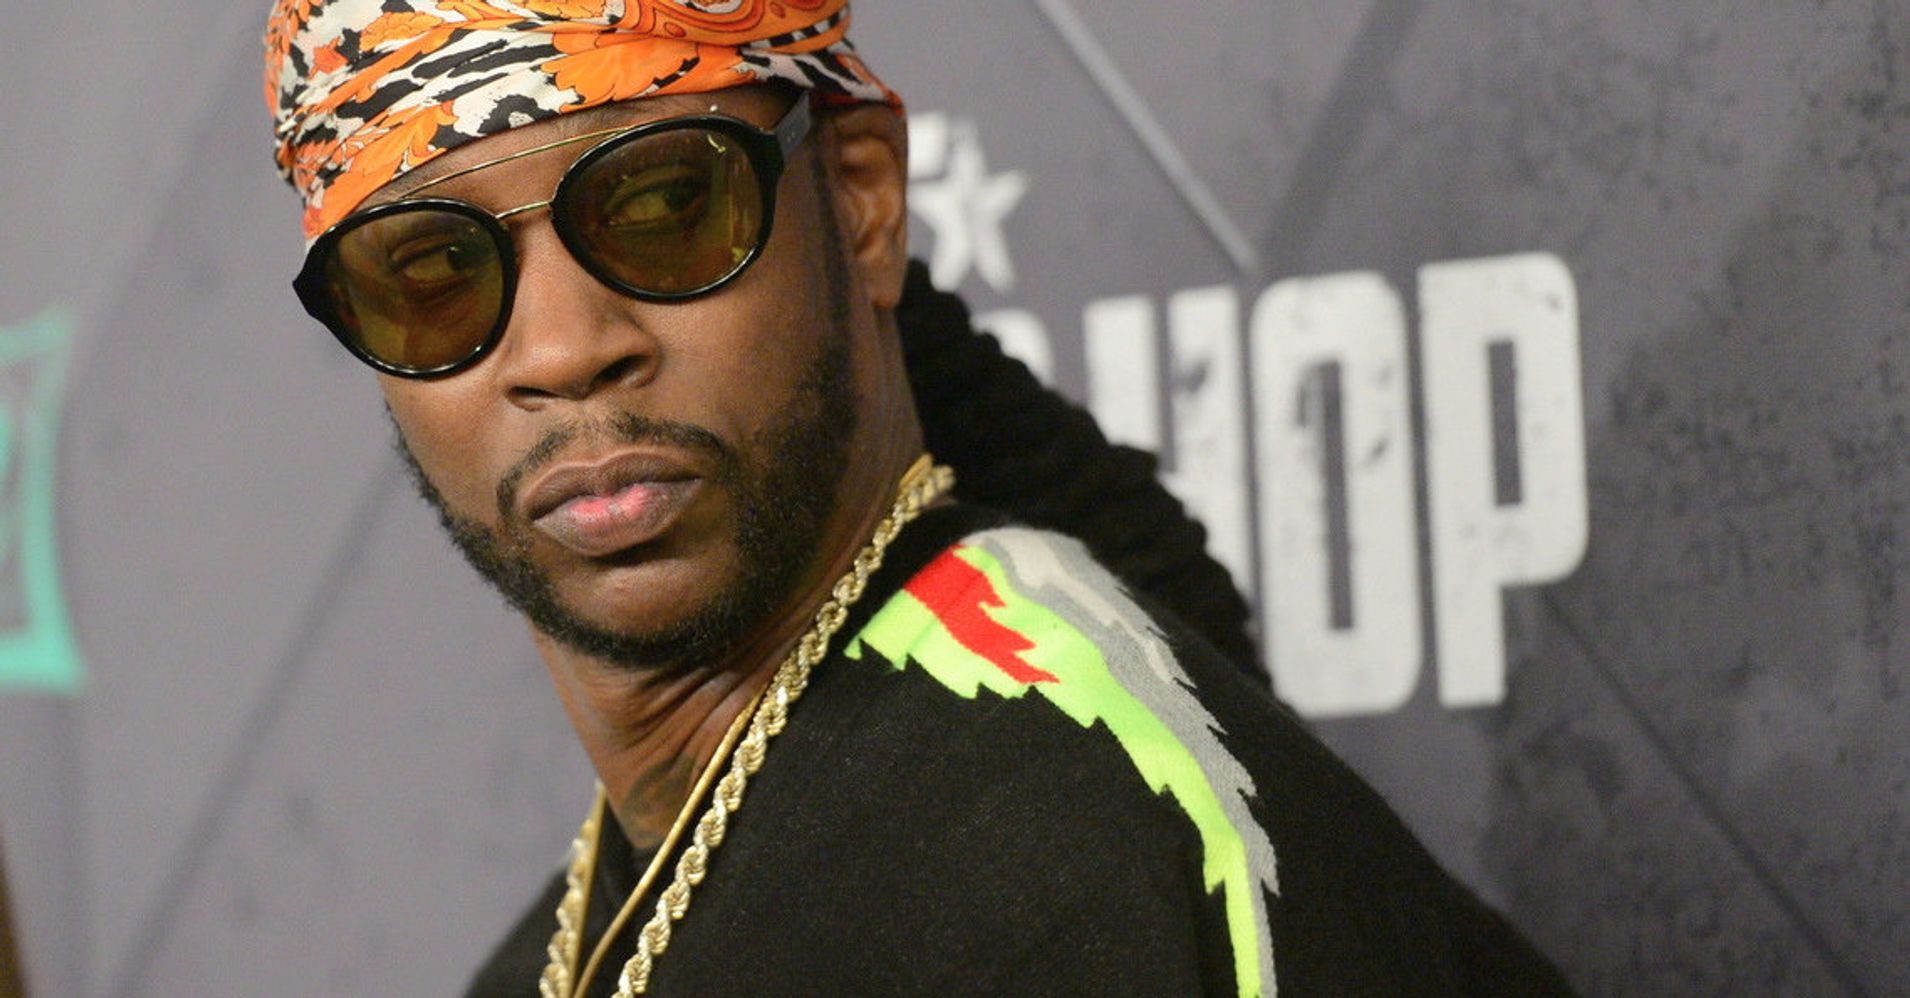 Rapper 2 Chainz Just Proved Black Santa Claus Is Real | HuffPost